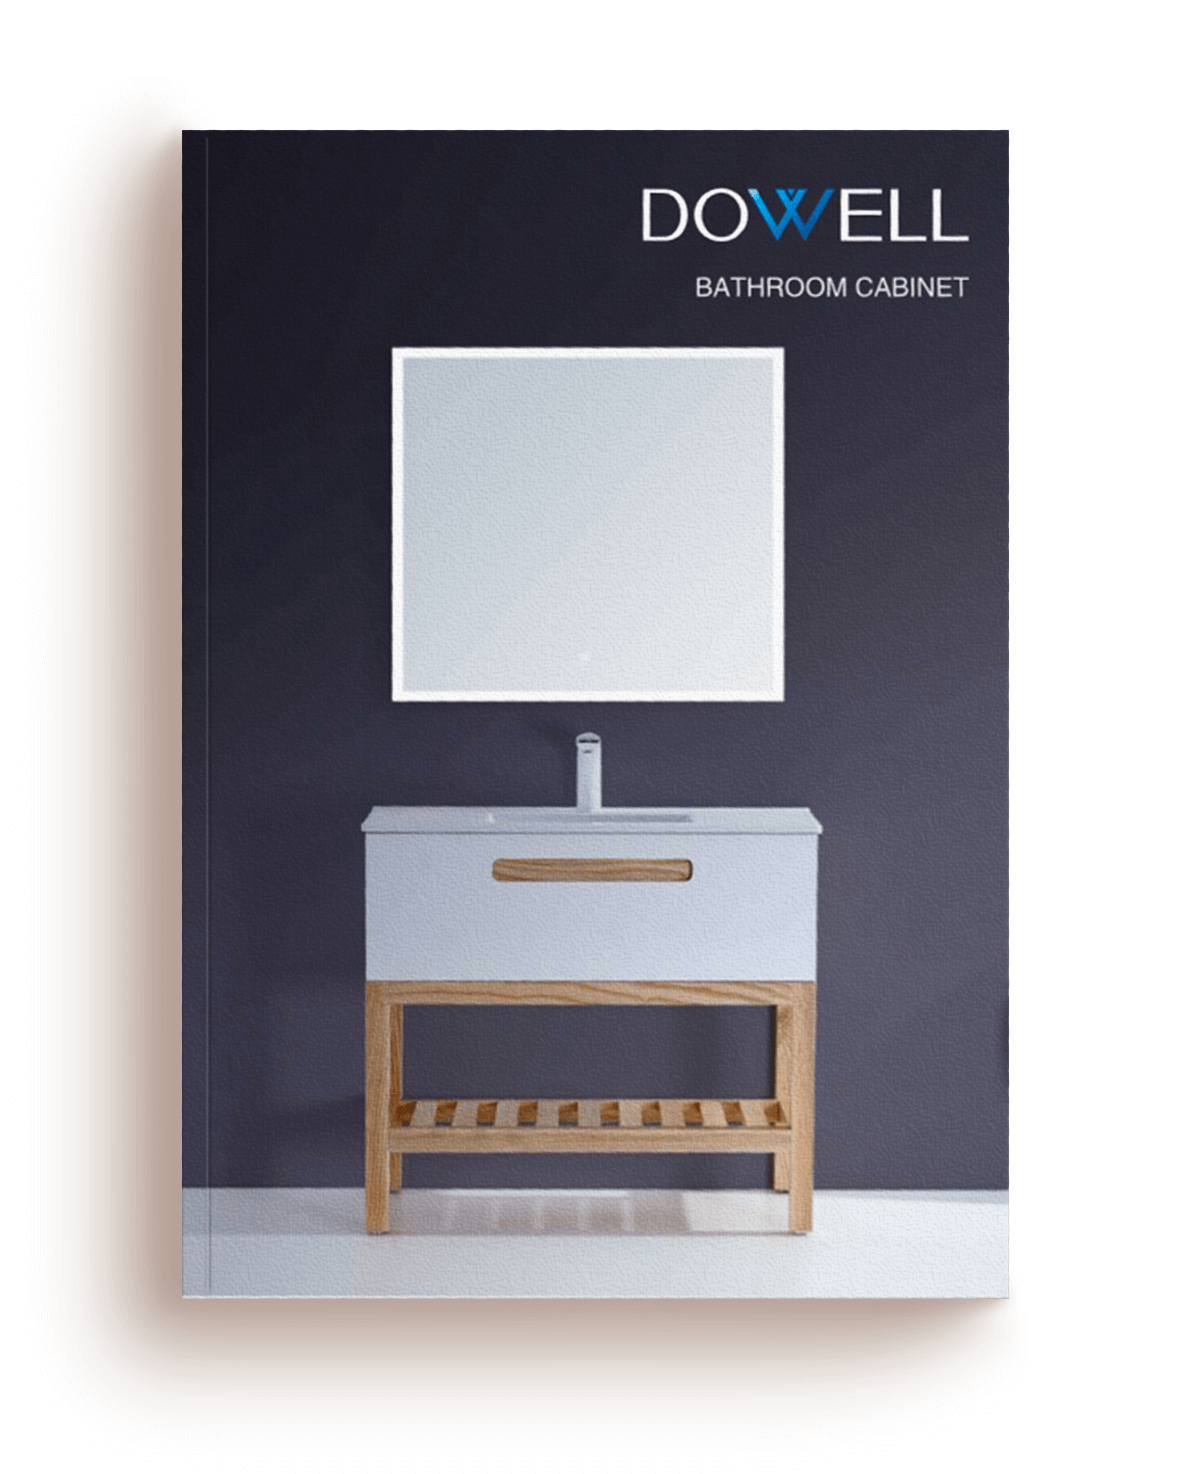 Dowell Catalogs | Home Art Tile Kitchen and Bath